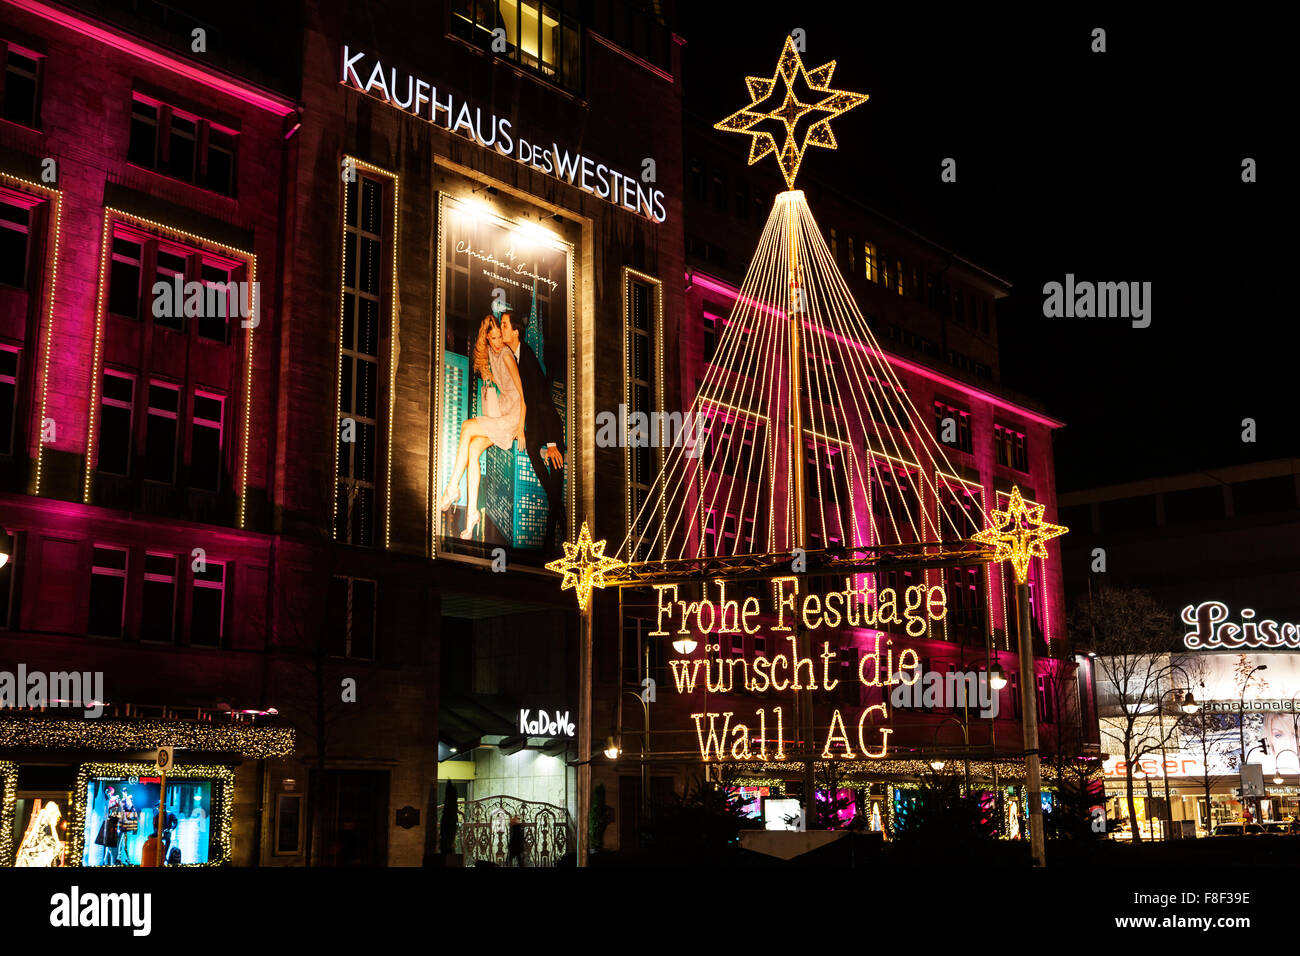 Kaufhaus des Westens and advertising for Wall AG at christmas time in Berlin Germany Stock Photo